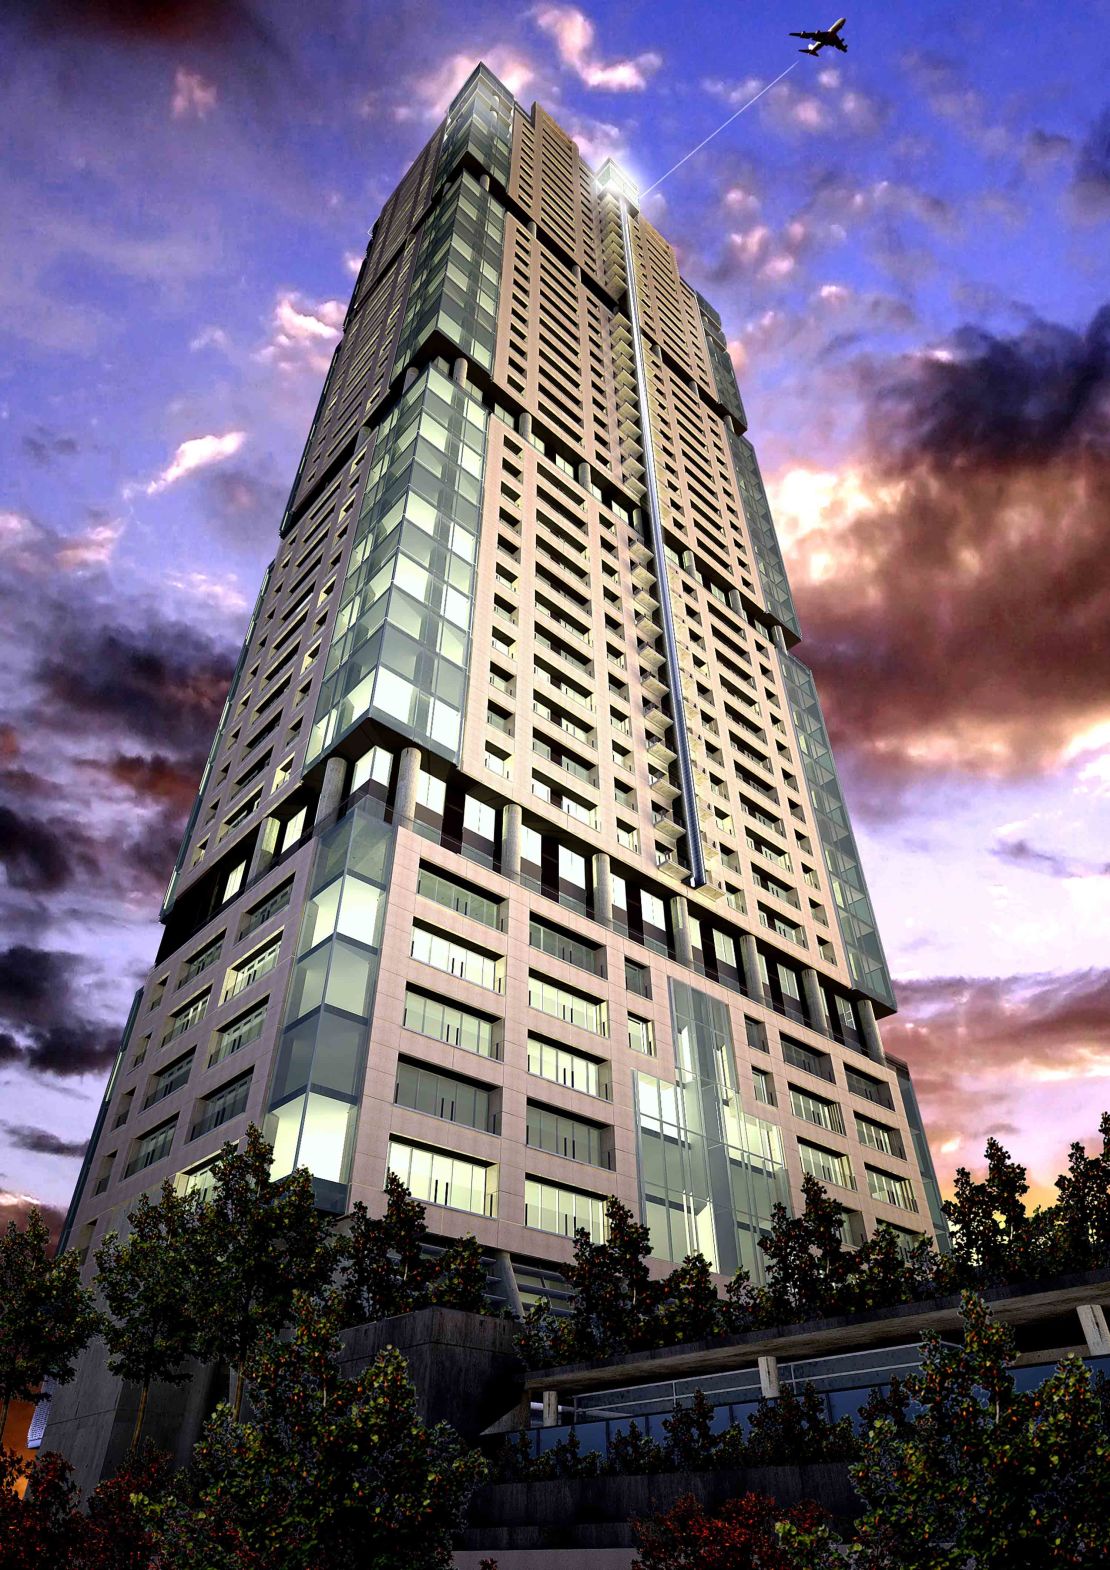 A rendering shows the Leonardo building, the tallest in Africa at 745 feet (227 meters) high.